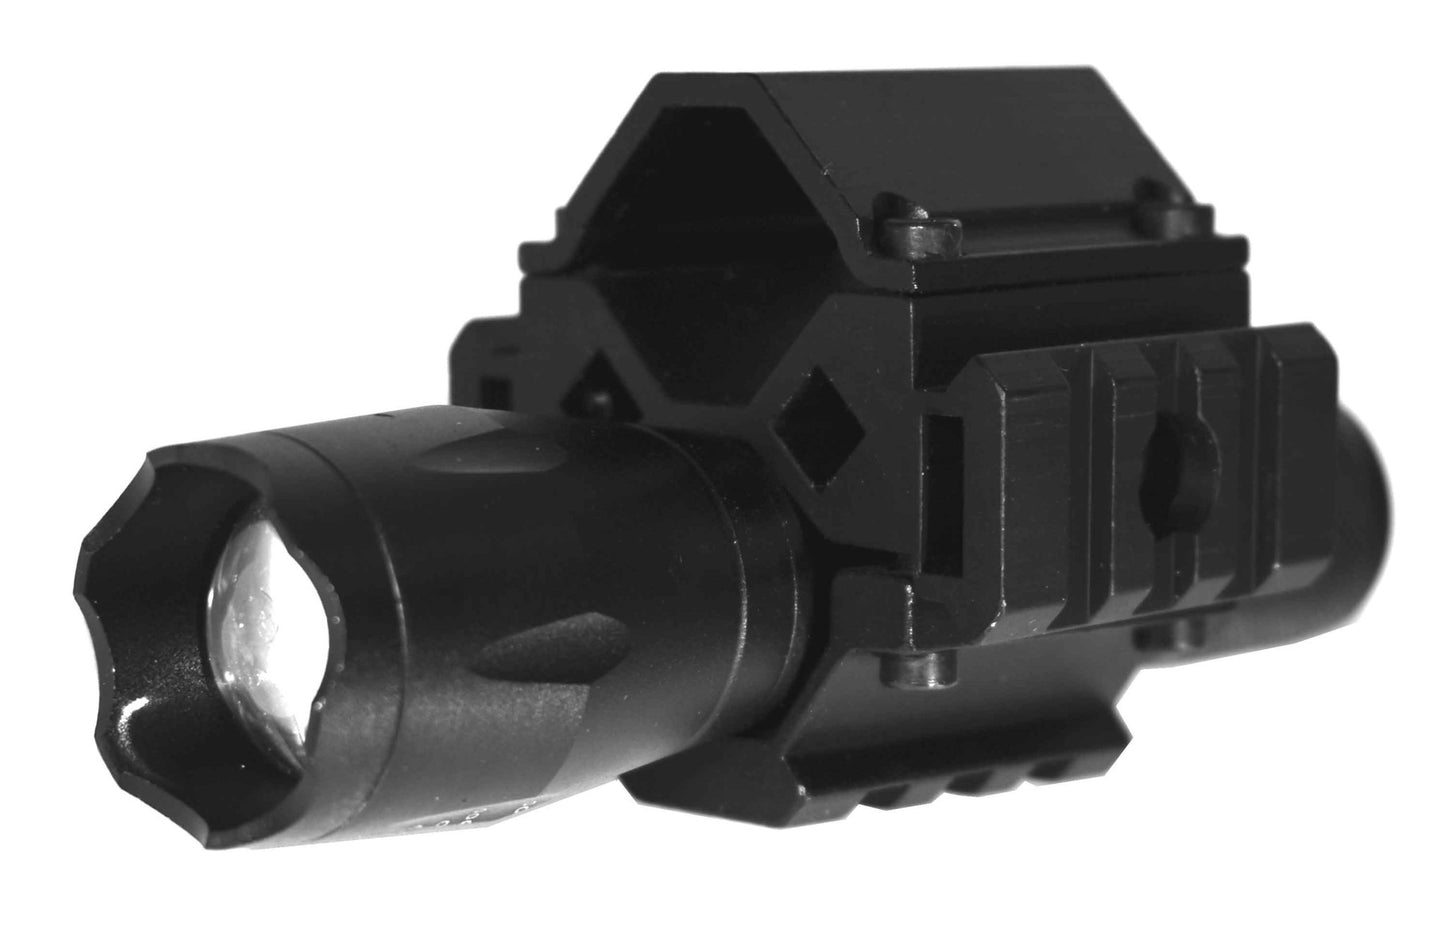 Tactical 1200 Lumen Flashlight With Mount Compatible With 20 Gauge Shotguns. - TRINITY SUPPLY INC